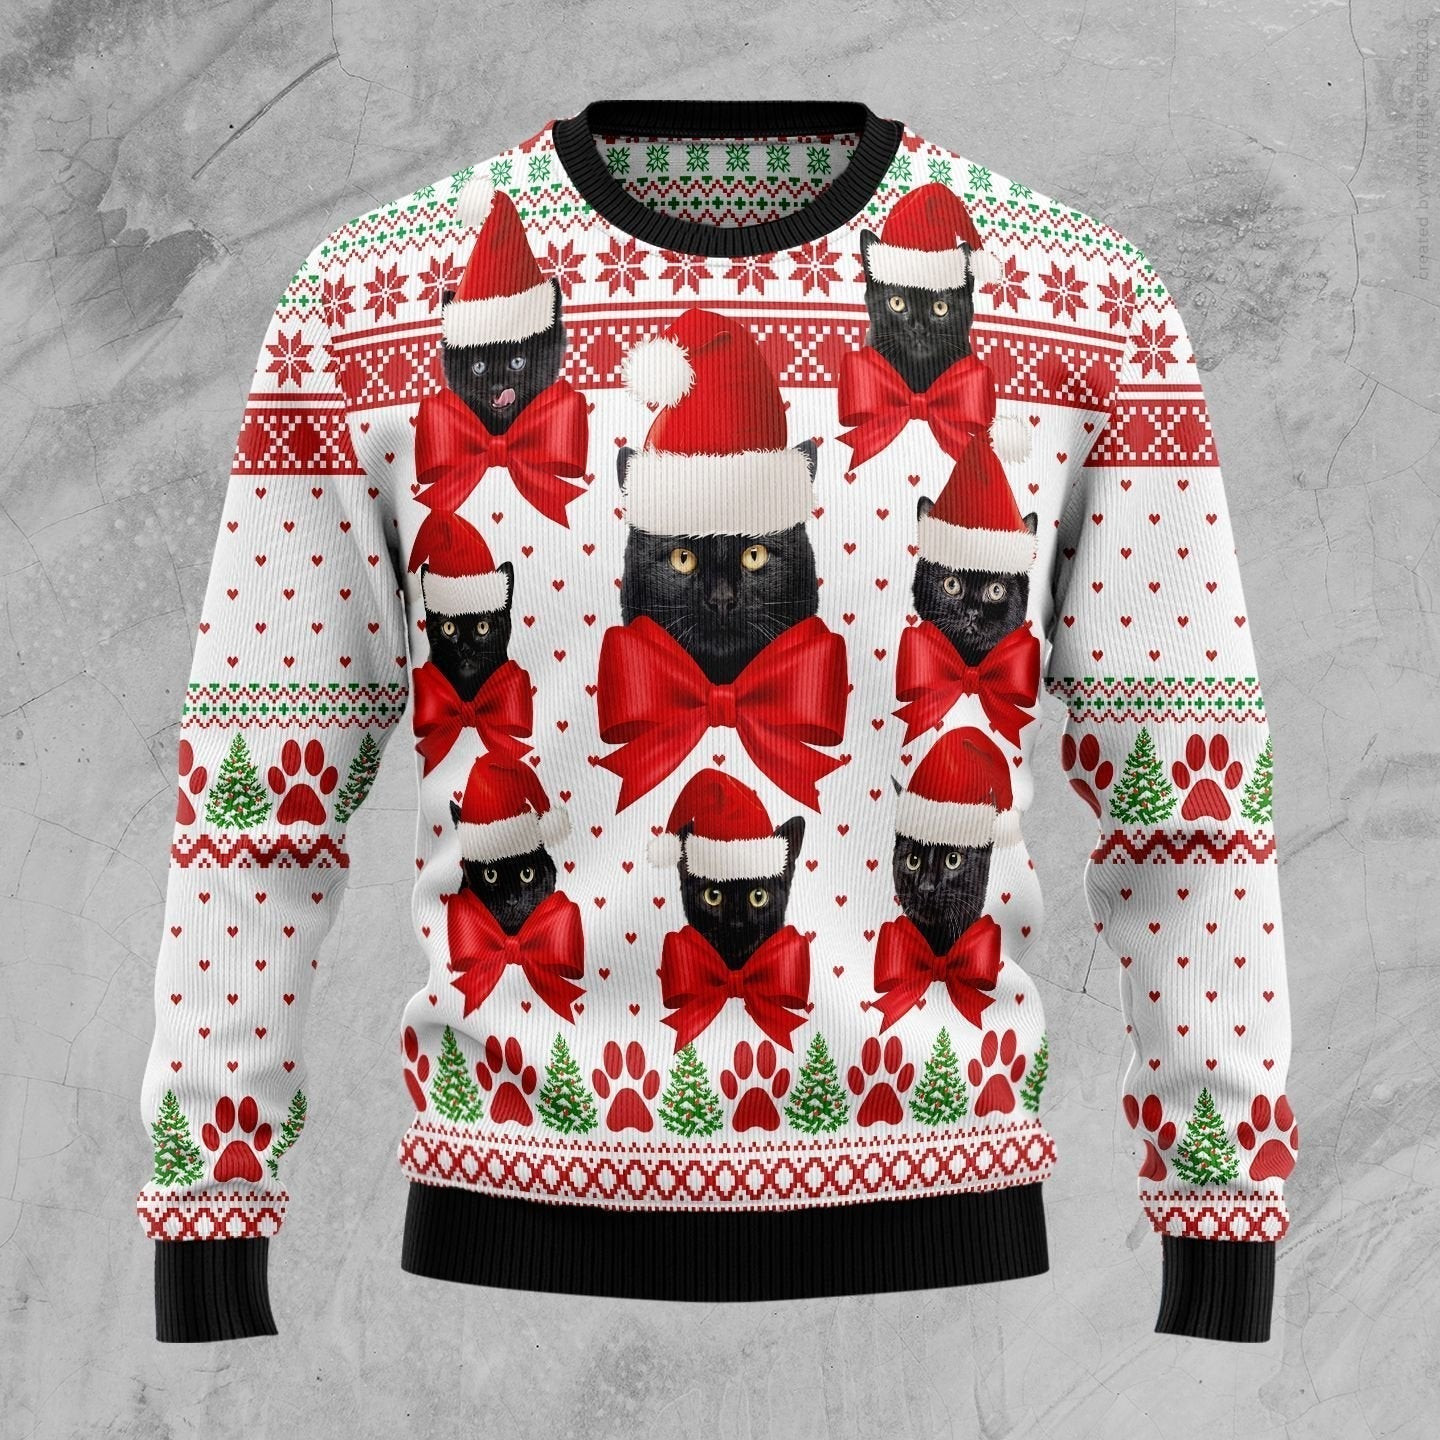 Black Cat Ball Ugly Christmas Sweater Ugly Sweater For Men Women